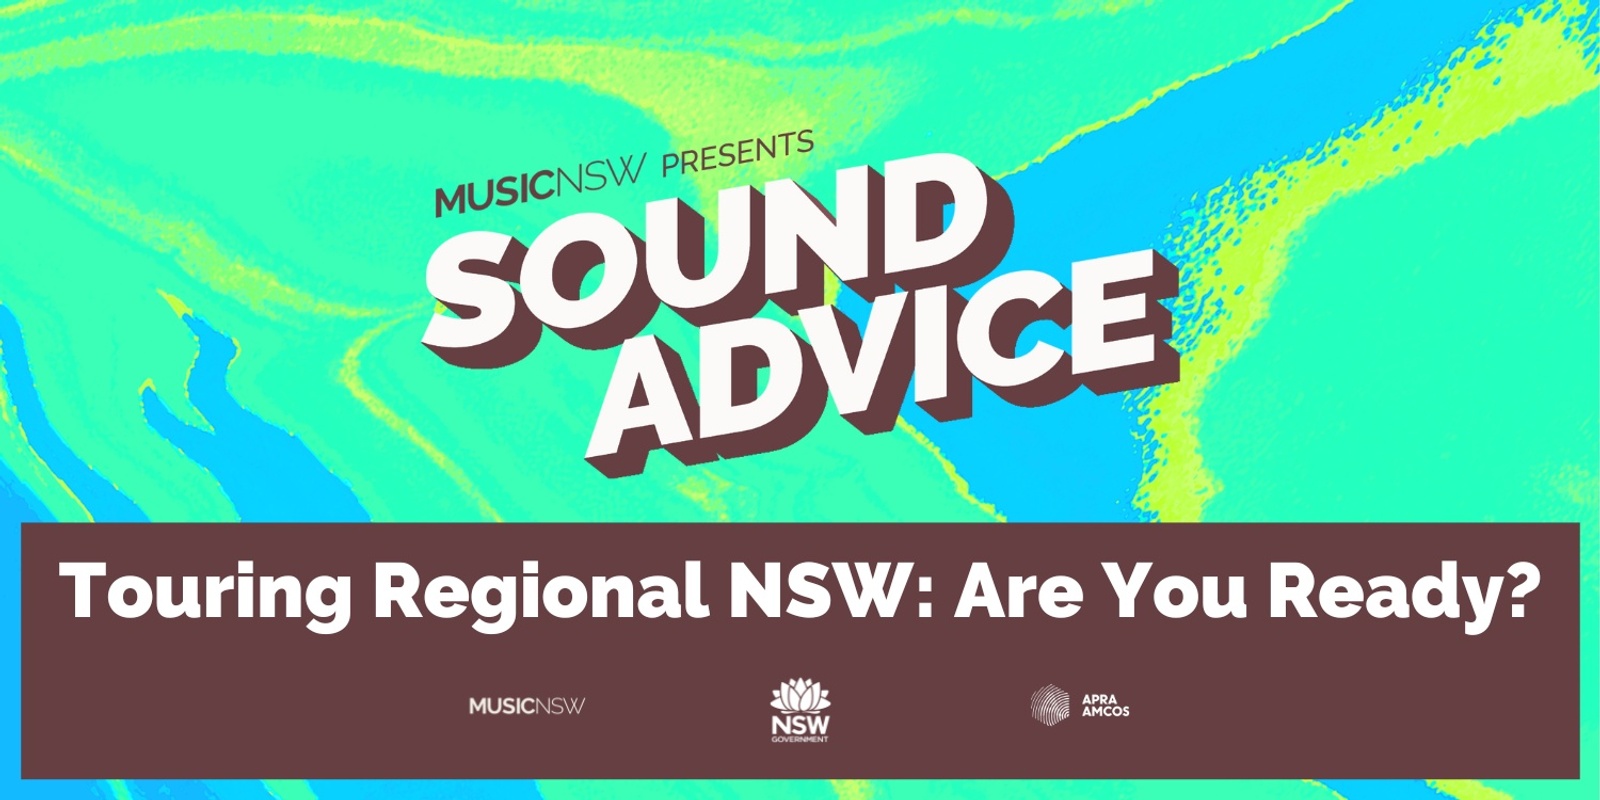 Banner image for Sound Advice: Touring Regional NSW - Are You Ready?